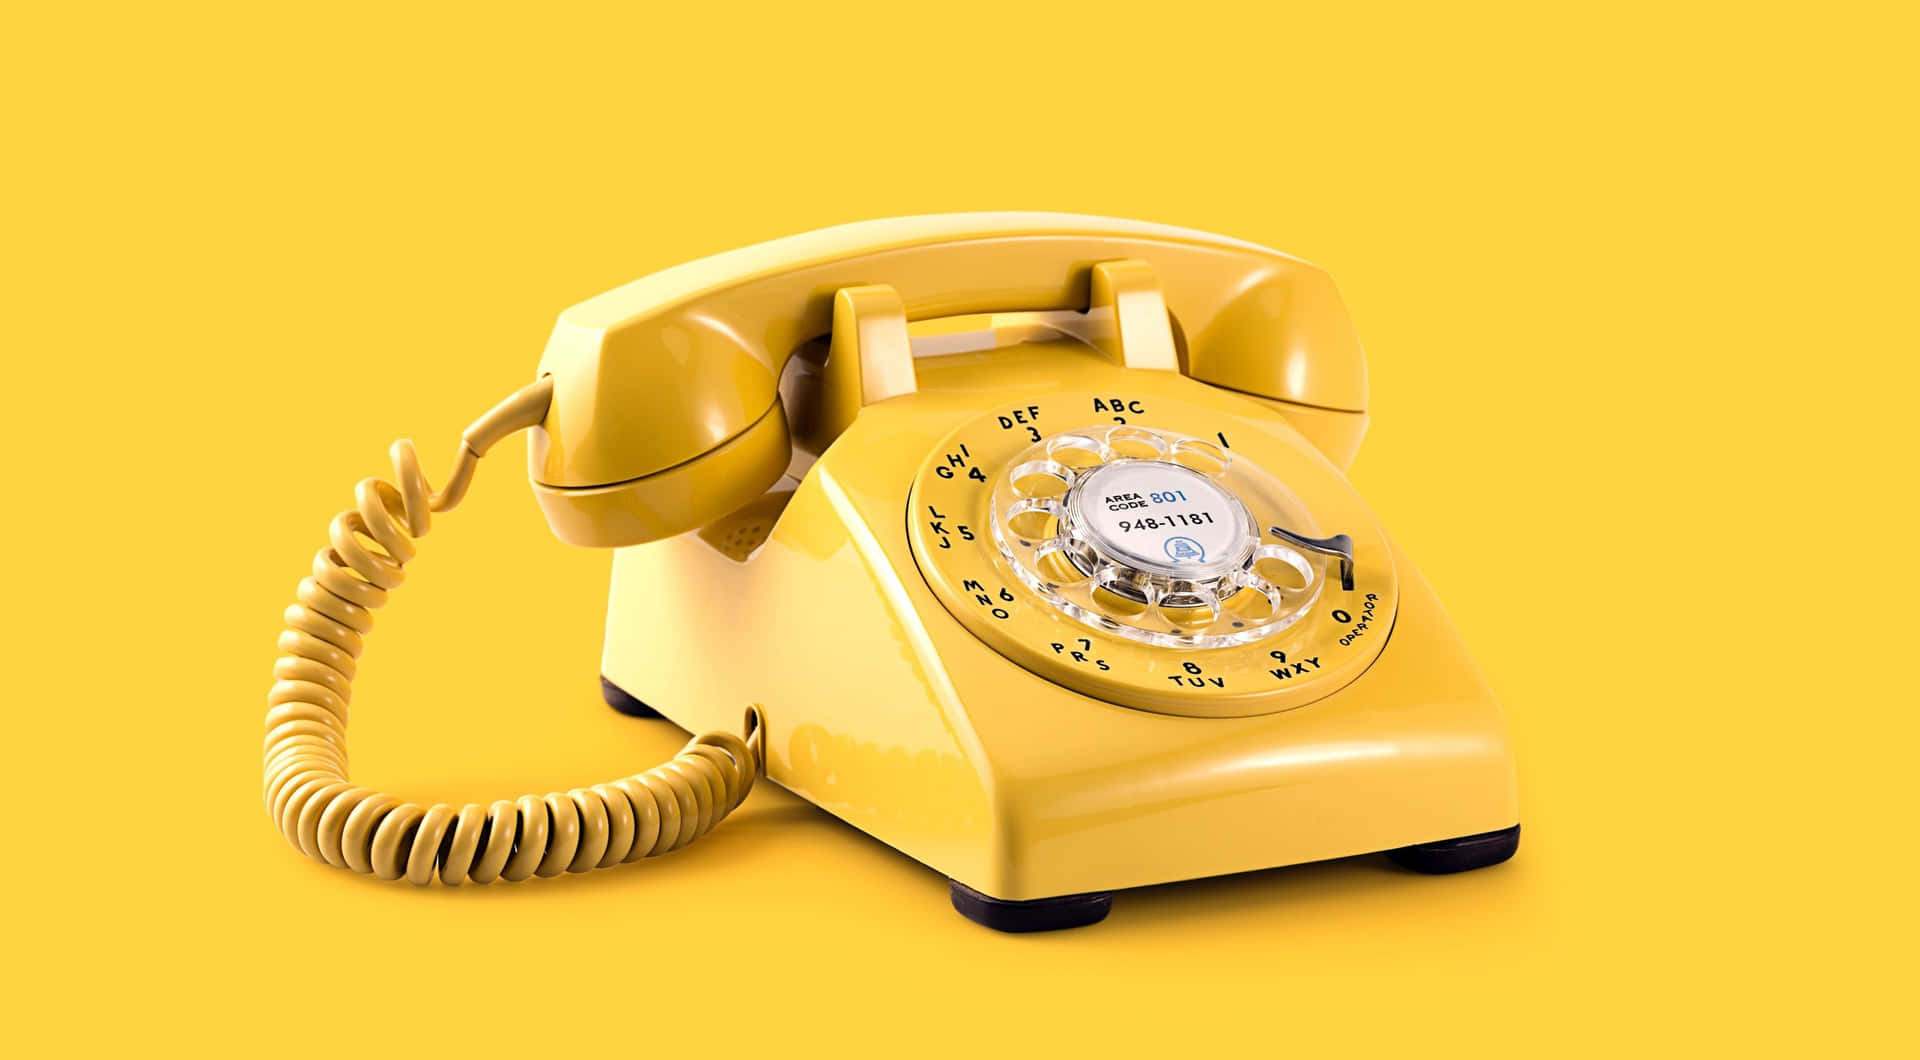 A Yellow Telephone On A Yellow Background Wallpaper